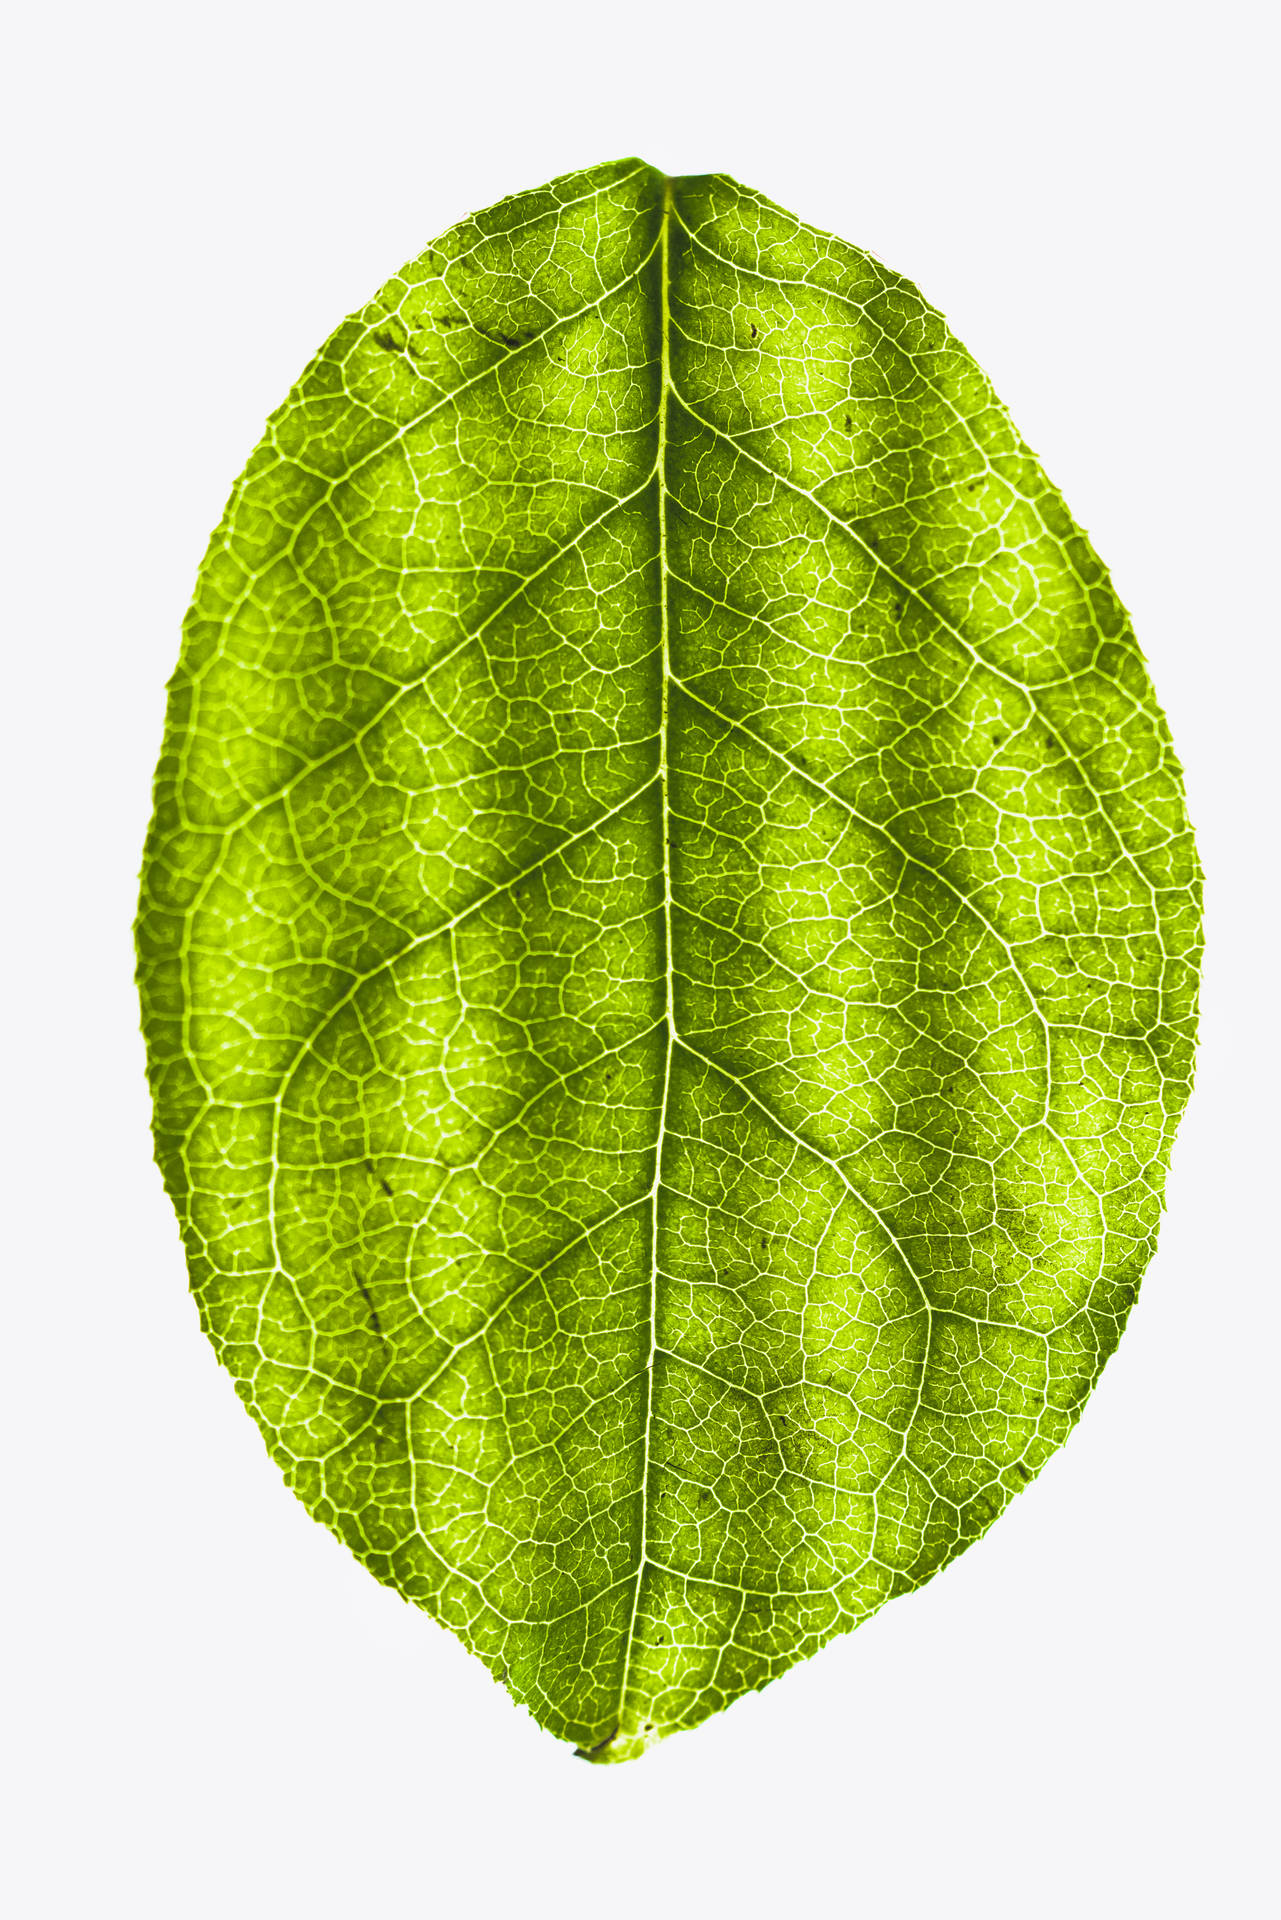 4997X7491 Leaf Wallpaper and Background